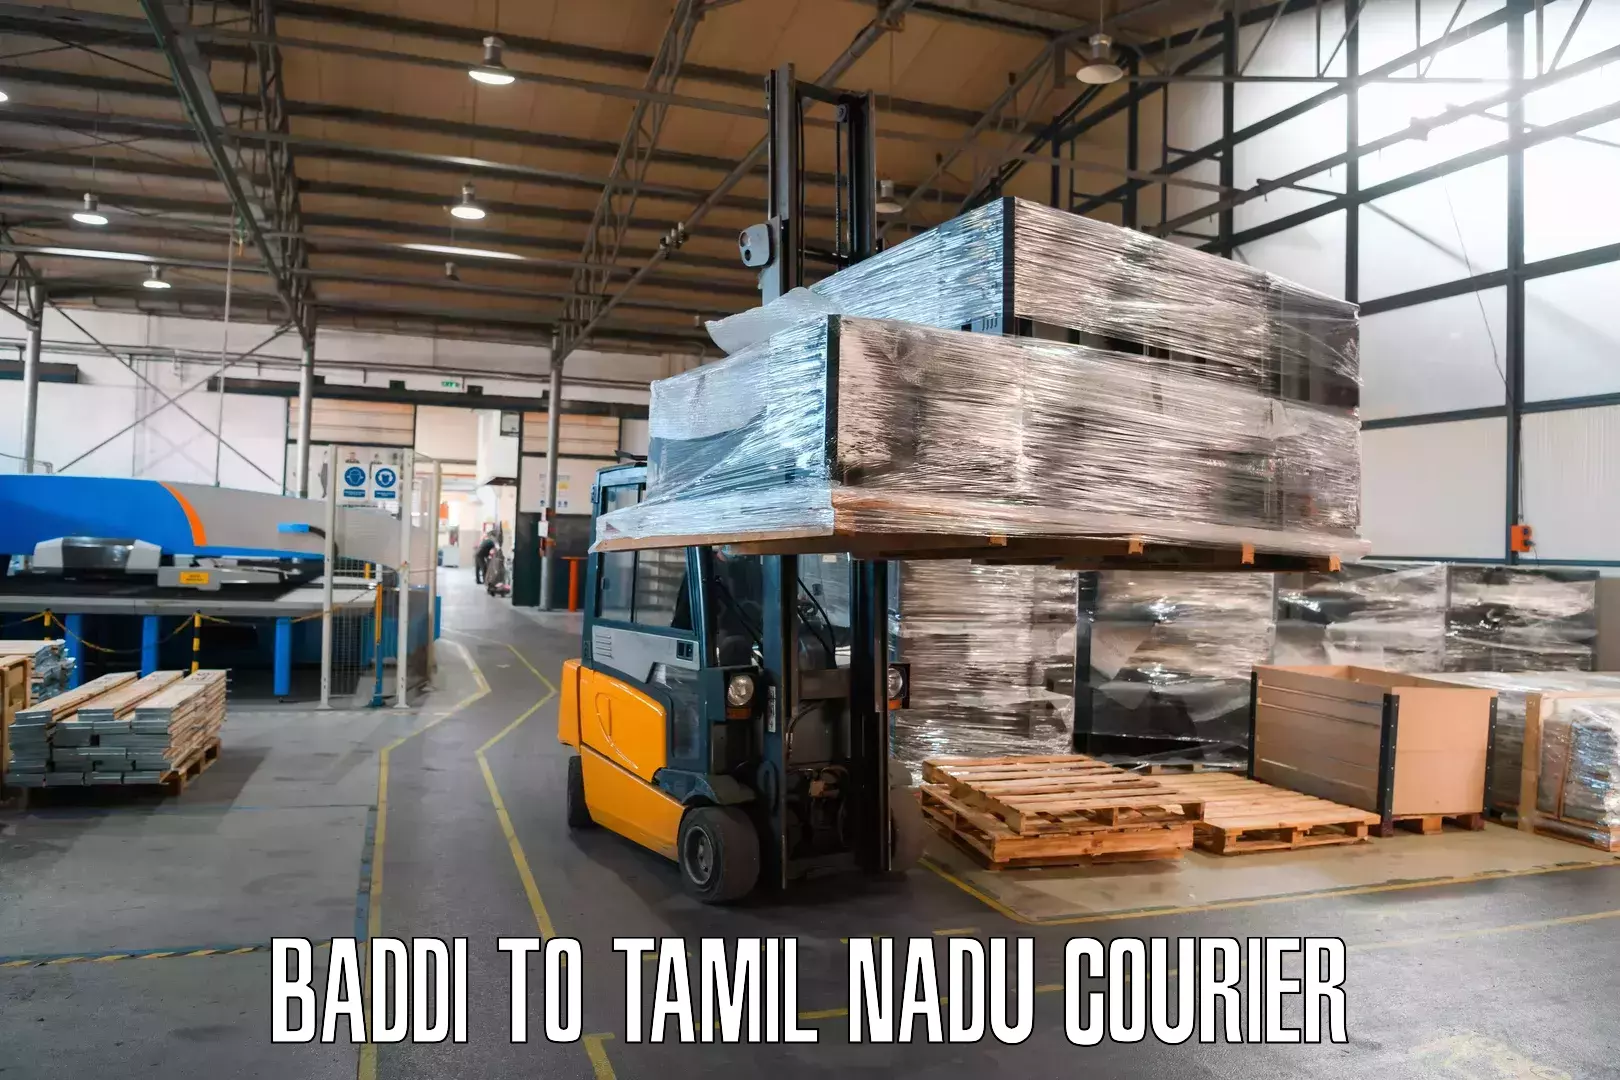 Digital courier platforms Baddi to Nagercoil